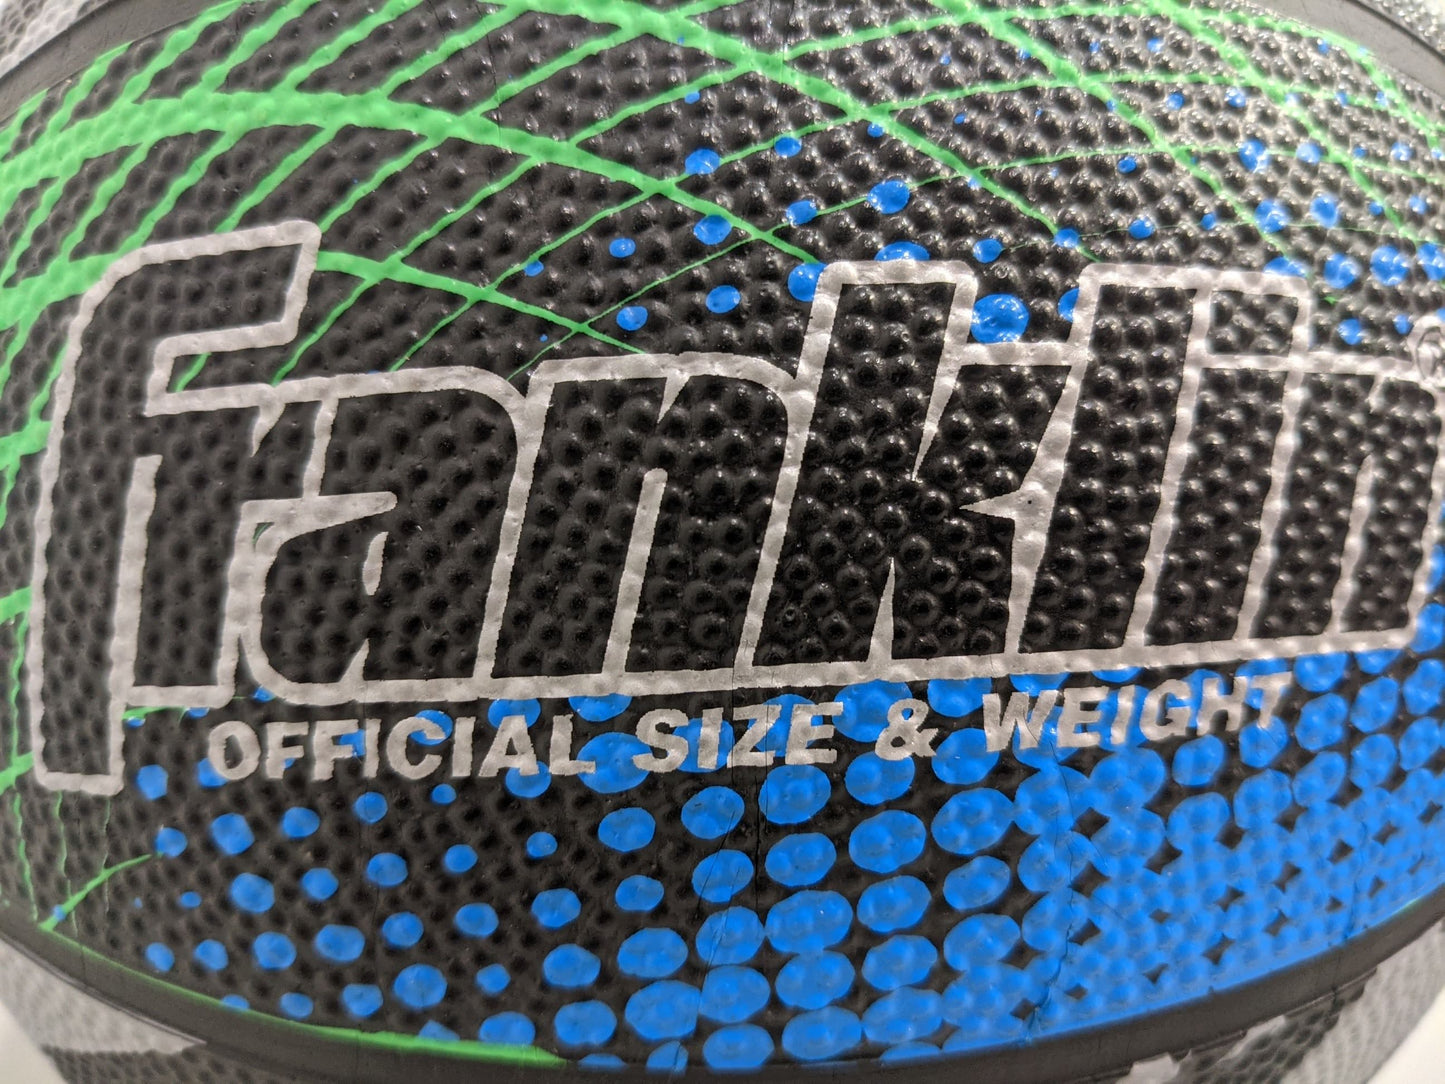 Franklin Official Size & Weight Basketball, Size 29.5, Multicolored, NEW